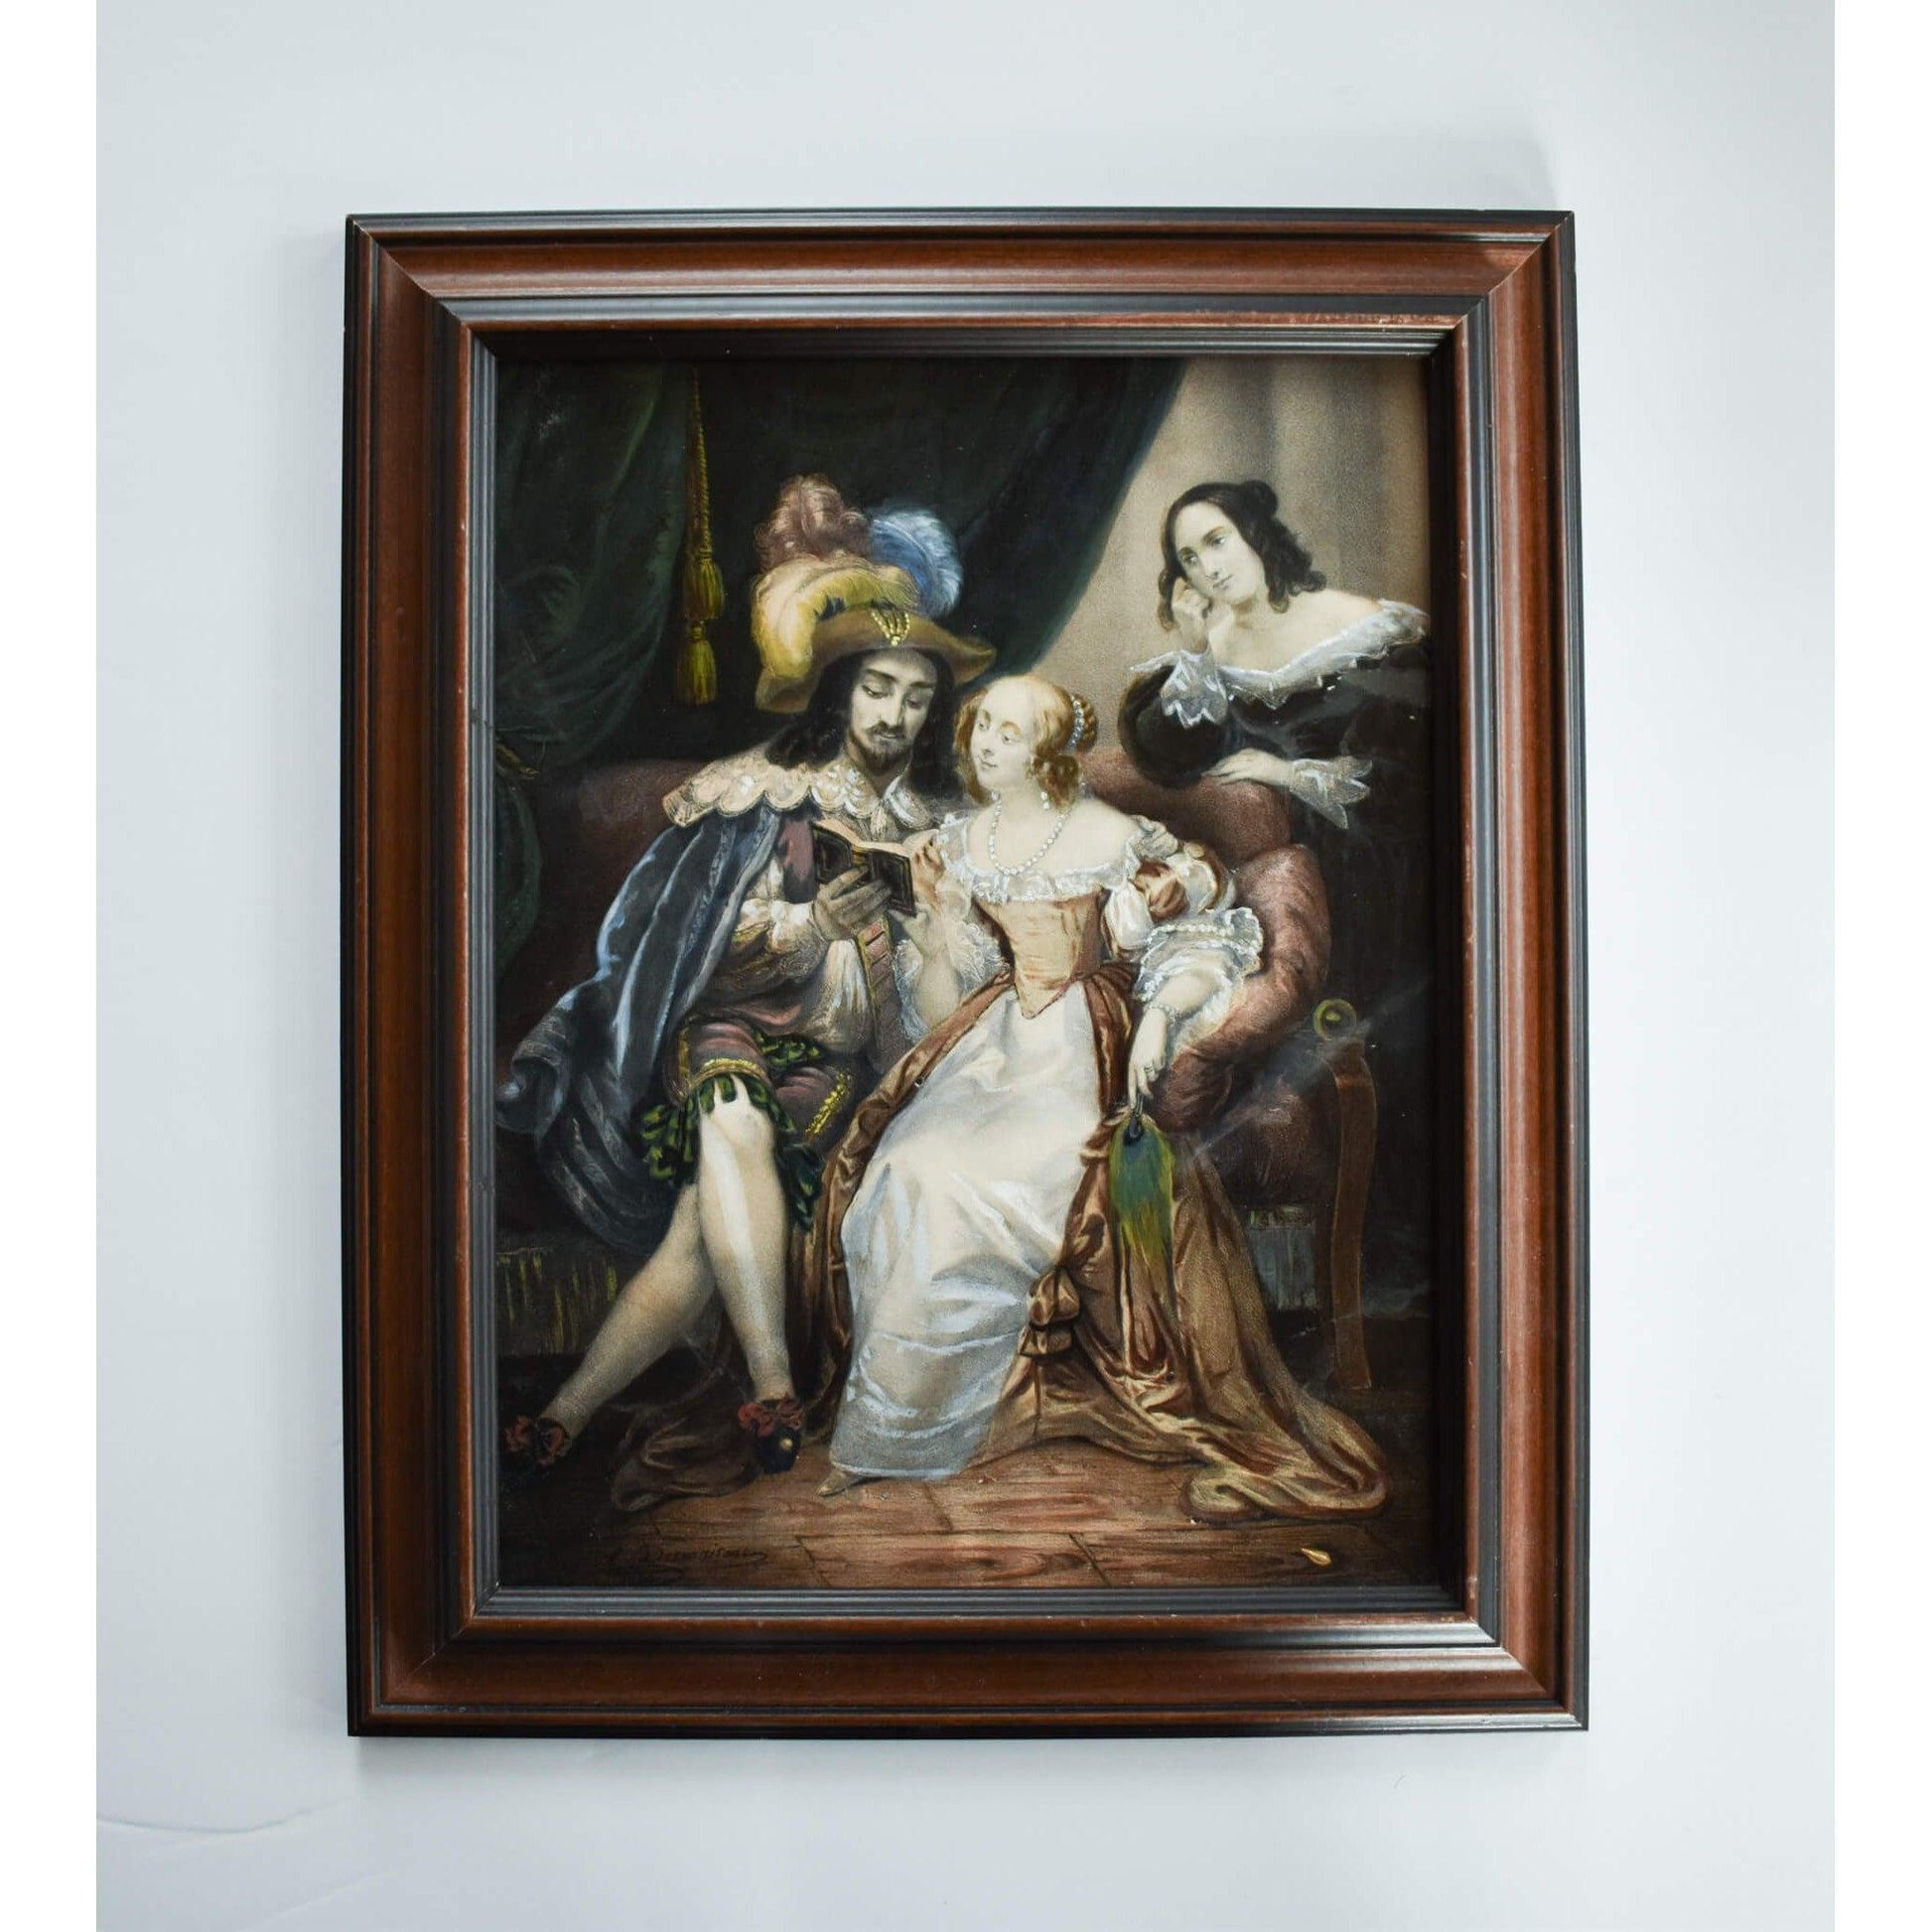 Antique original chromolithograph genre scene, signed and dated 1834 by Émile Desmaisons. For sale at Winckelmann Gallery.